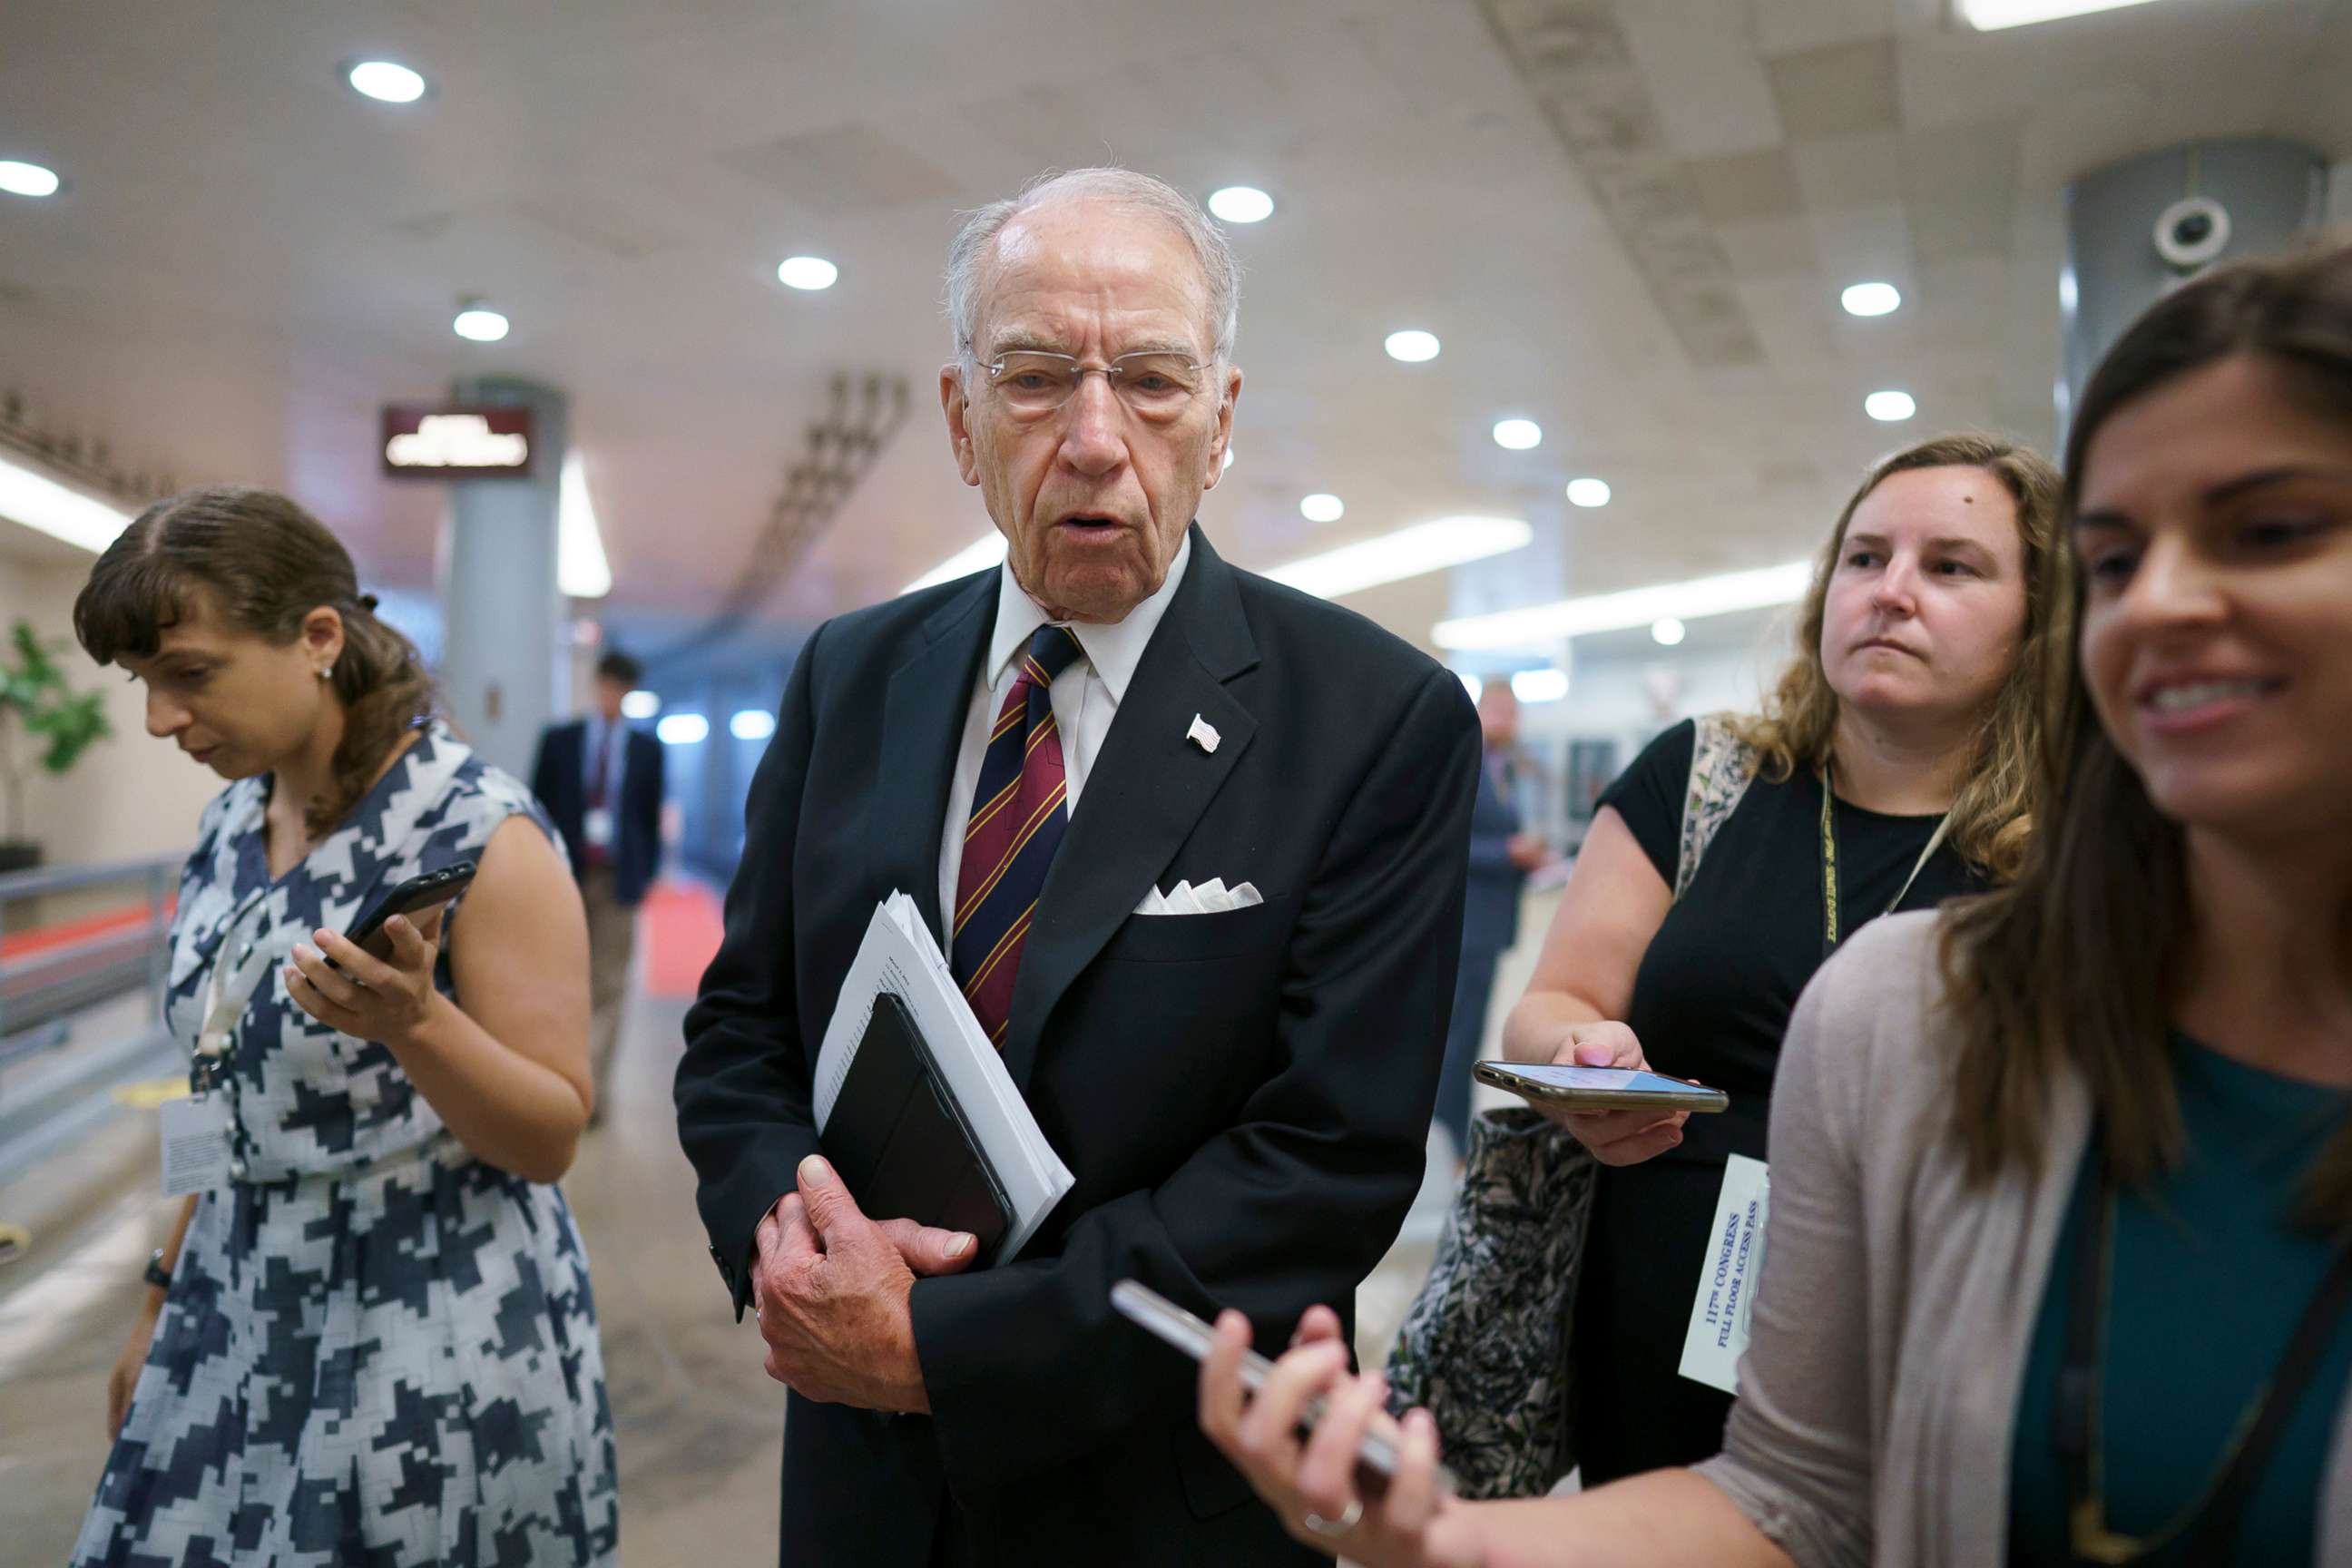 PHOTO: Sen. Chuck Grassley, R-Iowa, the ranking member of the Senate Judiciary Committee, speaks to reporters as senators arrive for votes at the Capitol in Washington, D.C., July 13, 2021.